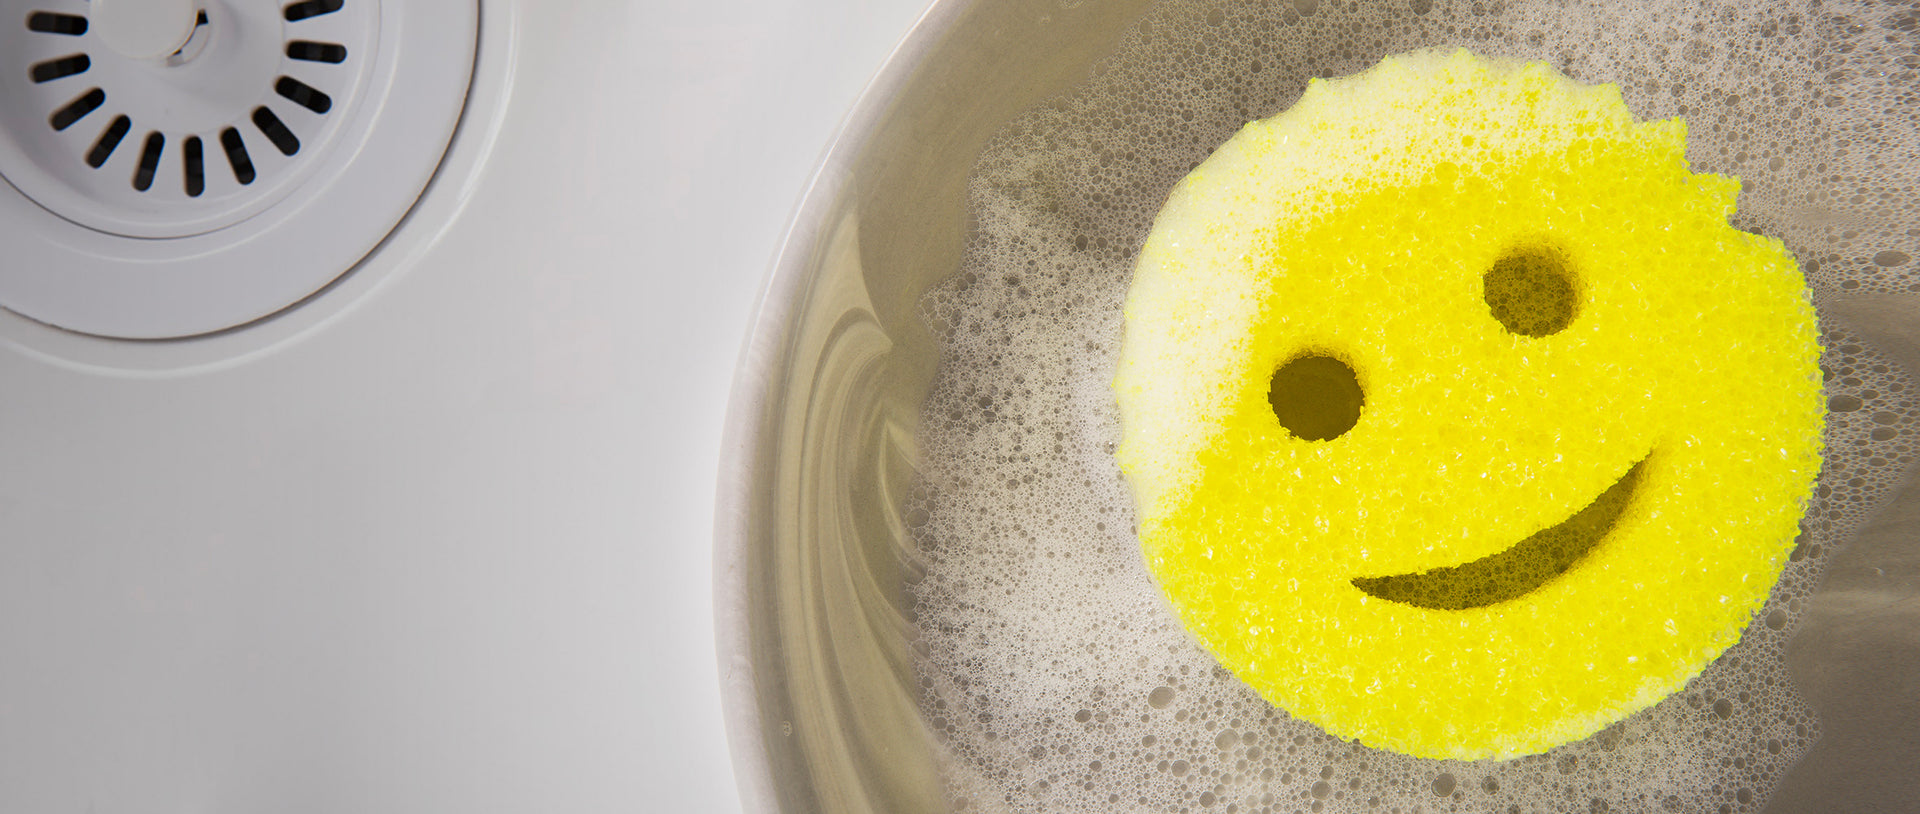 The Original Scrub Daddy - Official product video 